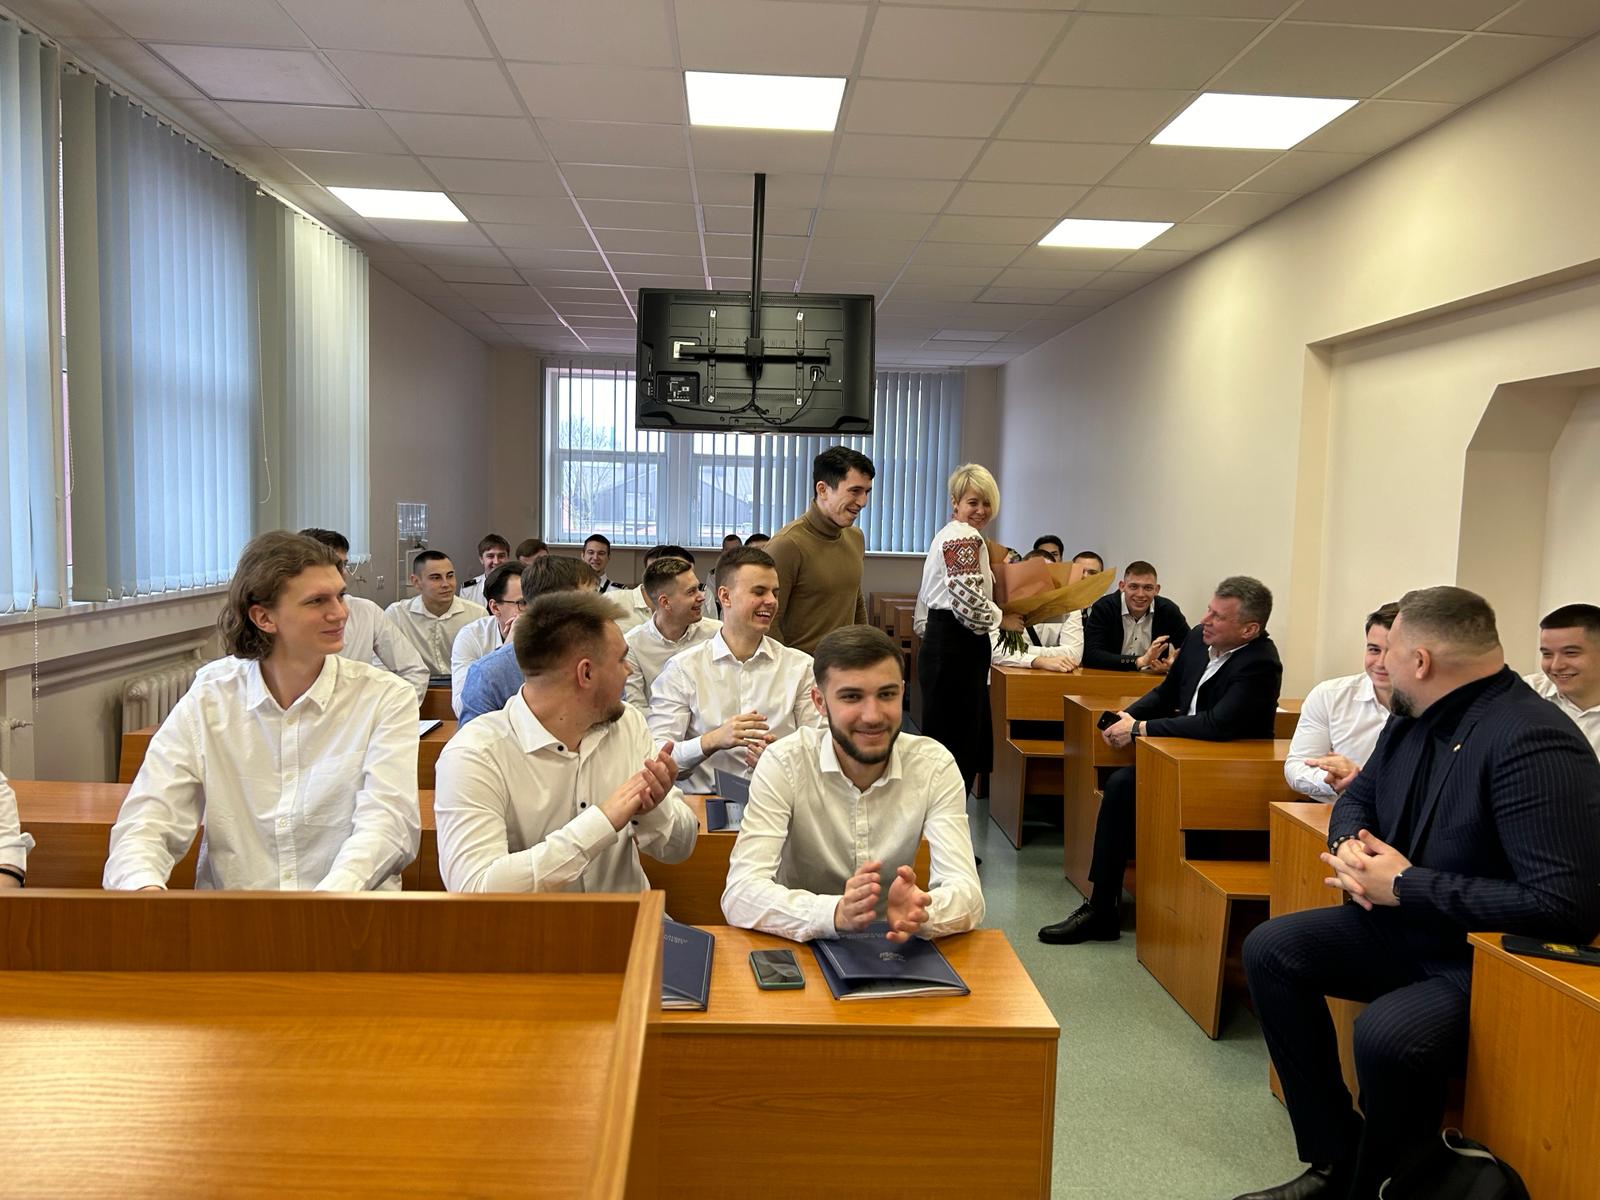 Ukrainian seafarer cadets laughing while seated in a classroom.